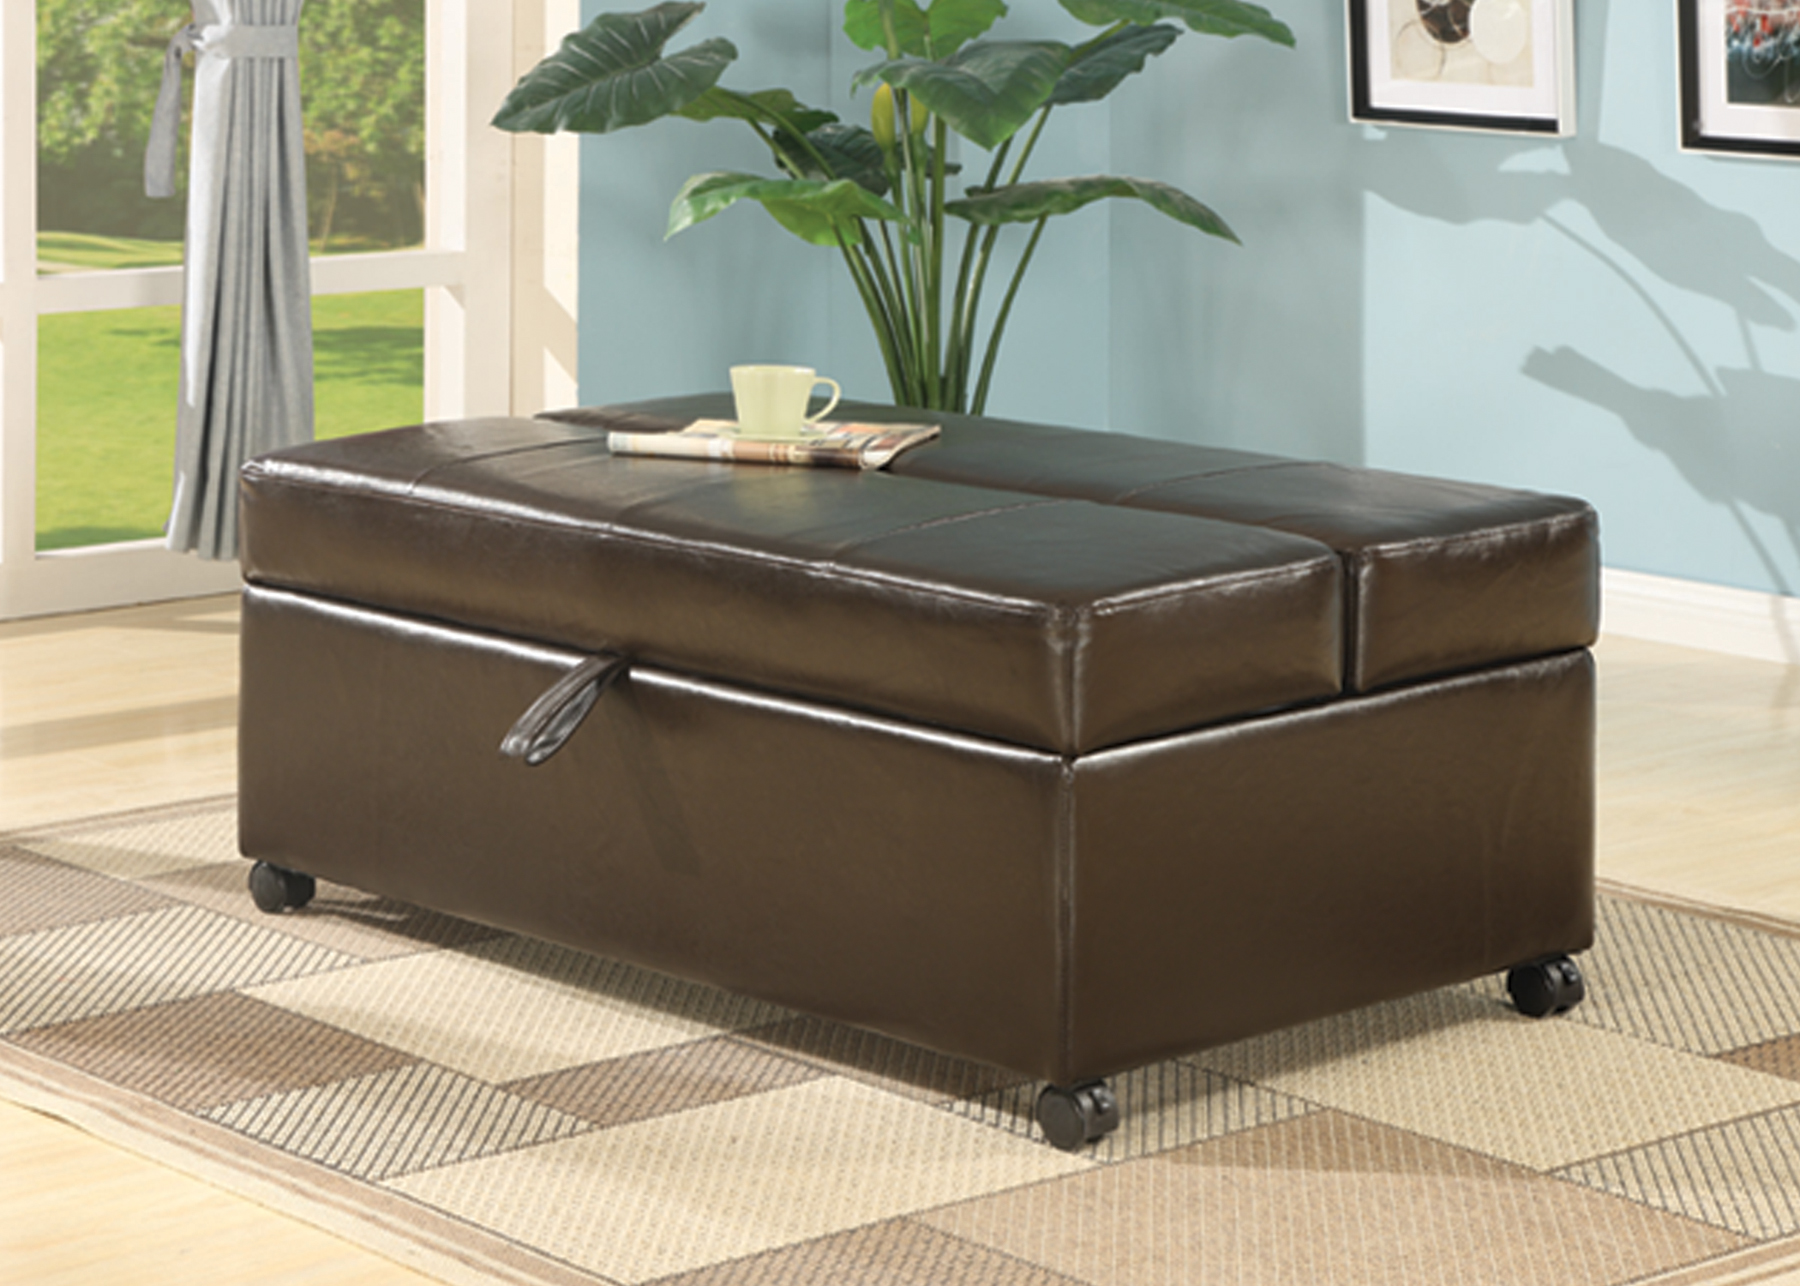 sleeper pull out sofa bed ottoman